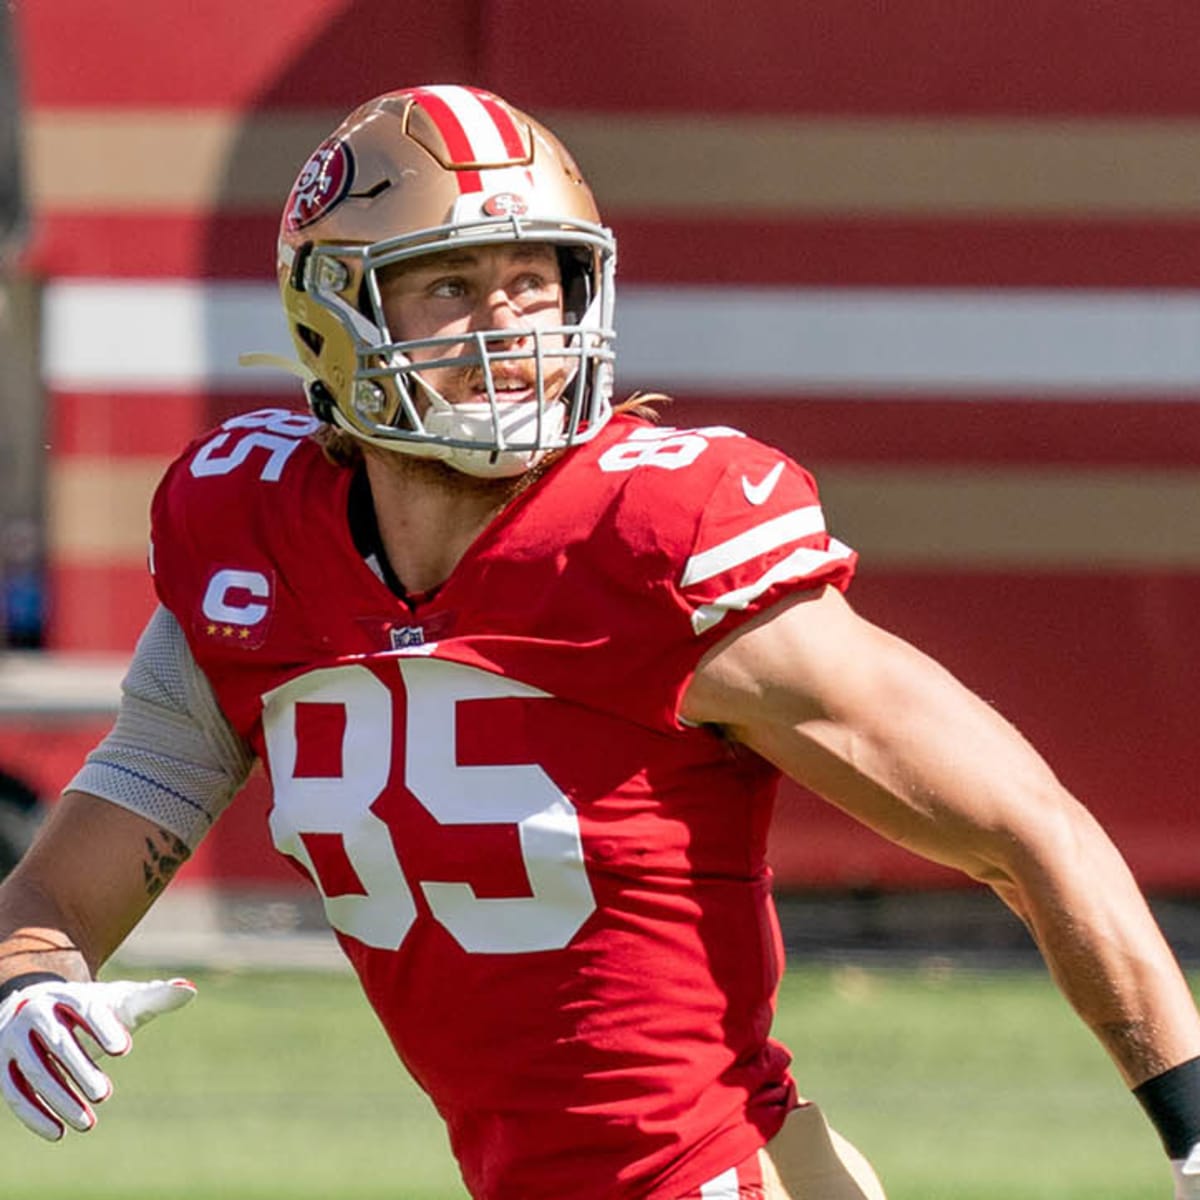 49ers' George Kittle Not Expected to Play on Sunday, per Report